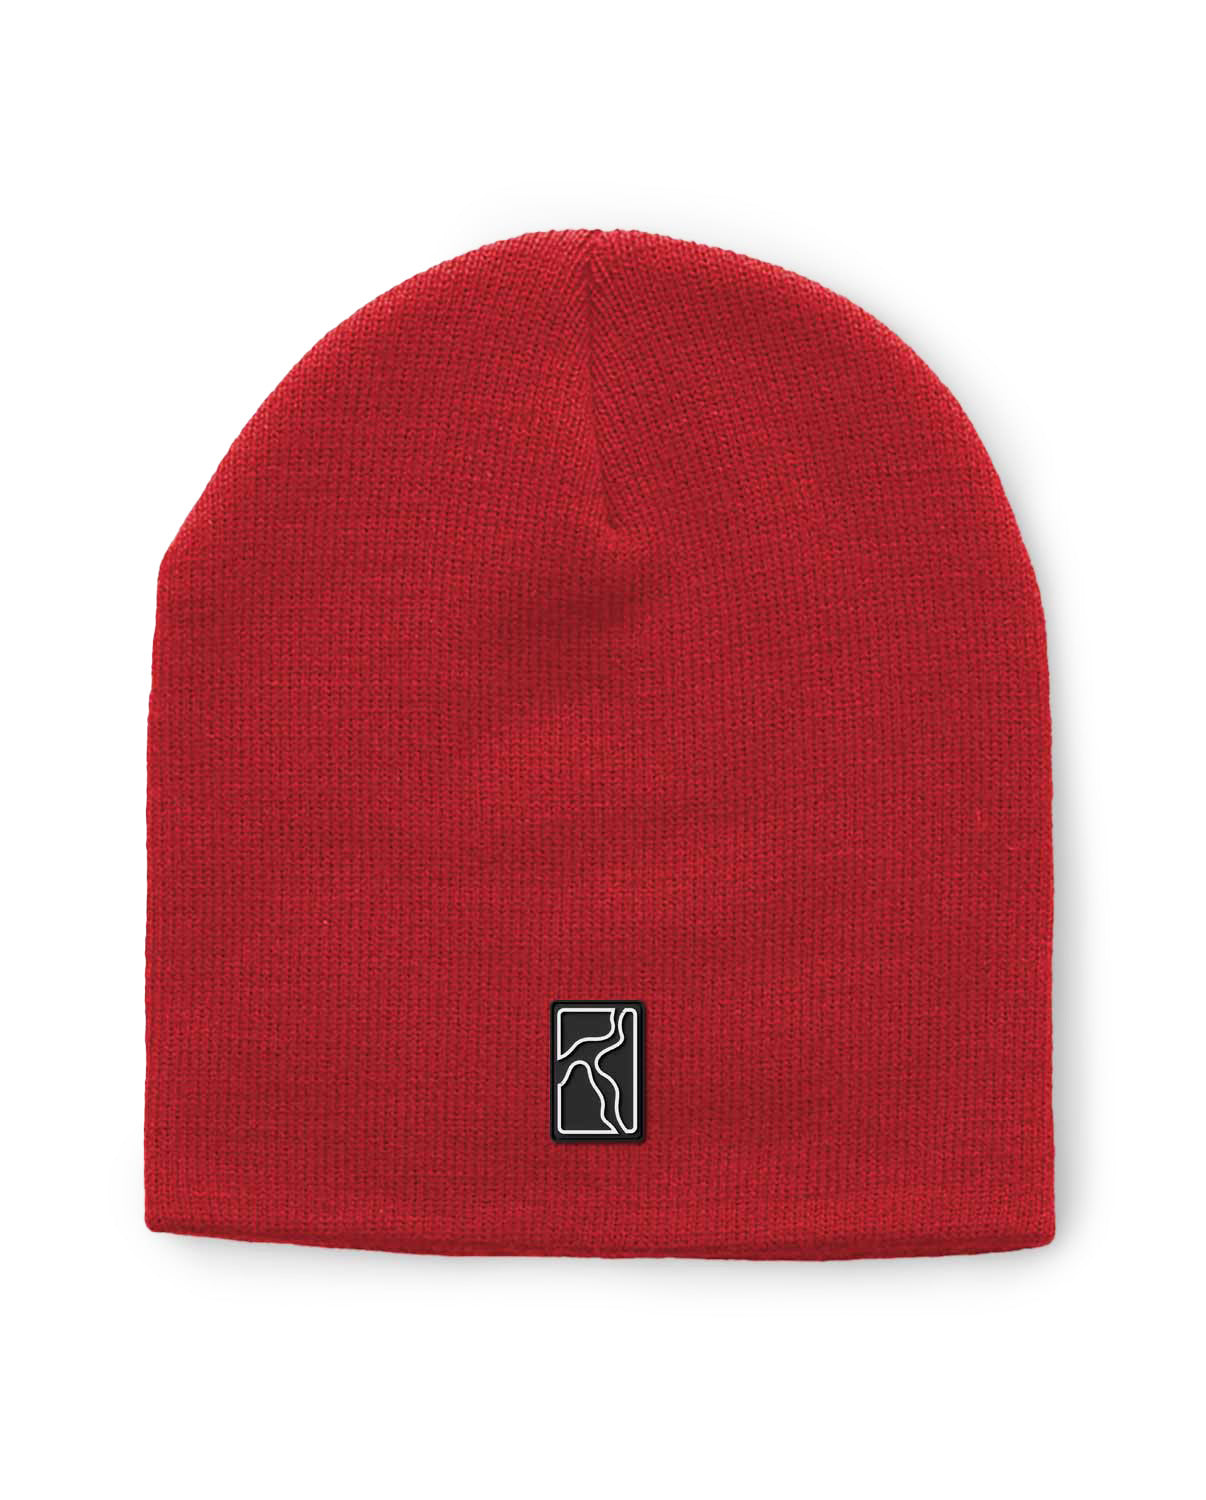 Poetic Collective - Skull Beanie Red